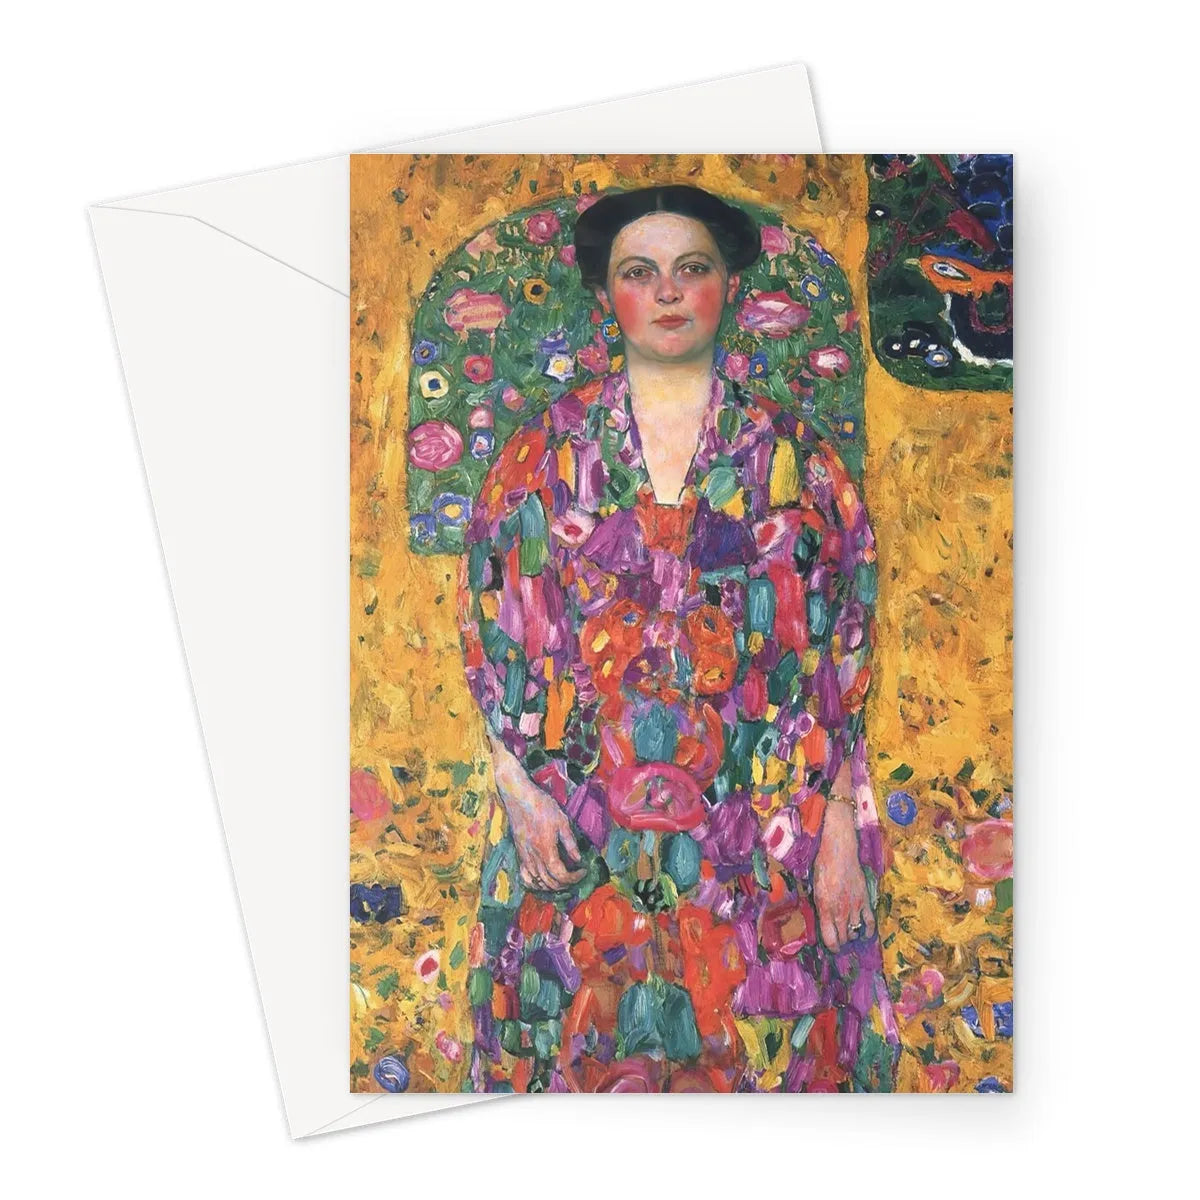 Eugenia Primavesi By Gustav Klimt Greeting Card - A5 Portrait / 10 Cards - Greeting & Note Cards - Aesthetic Art